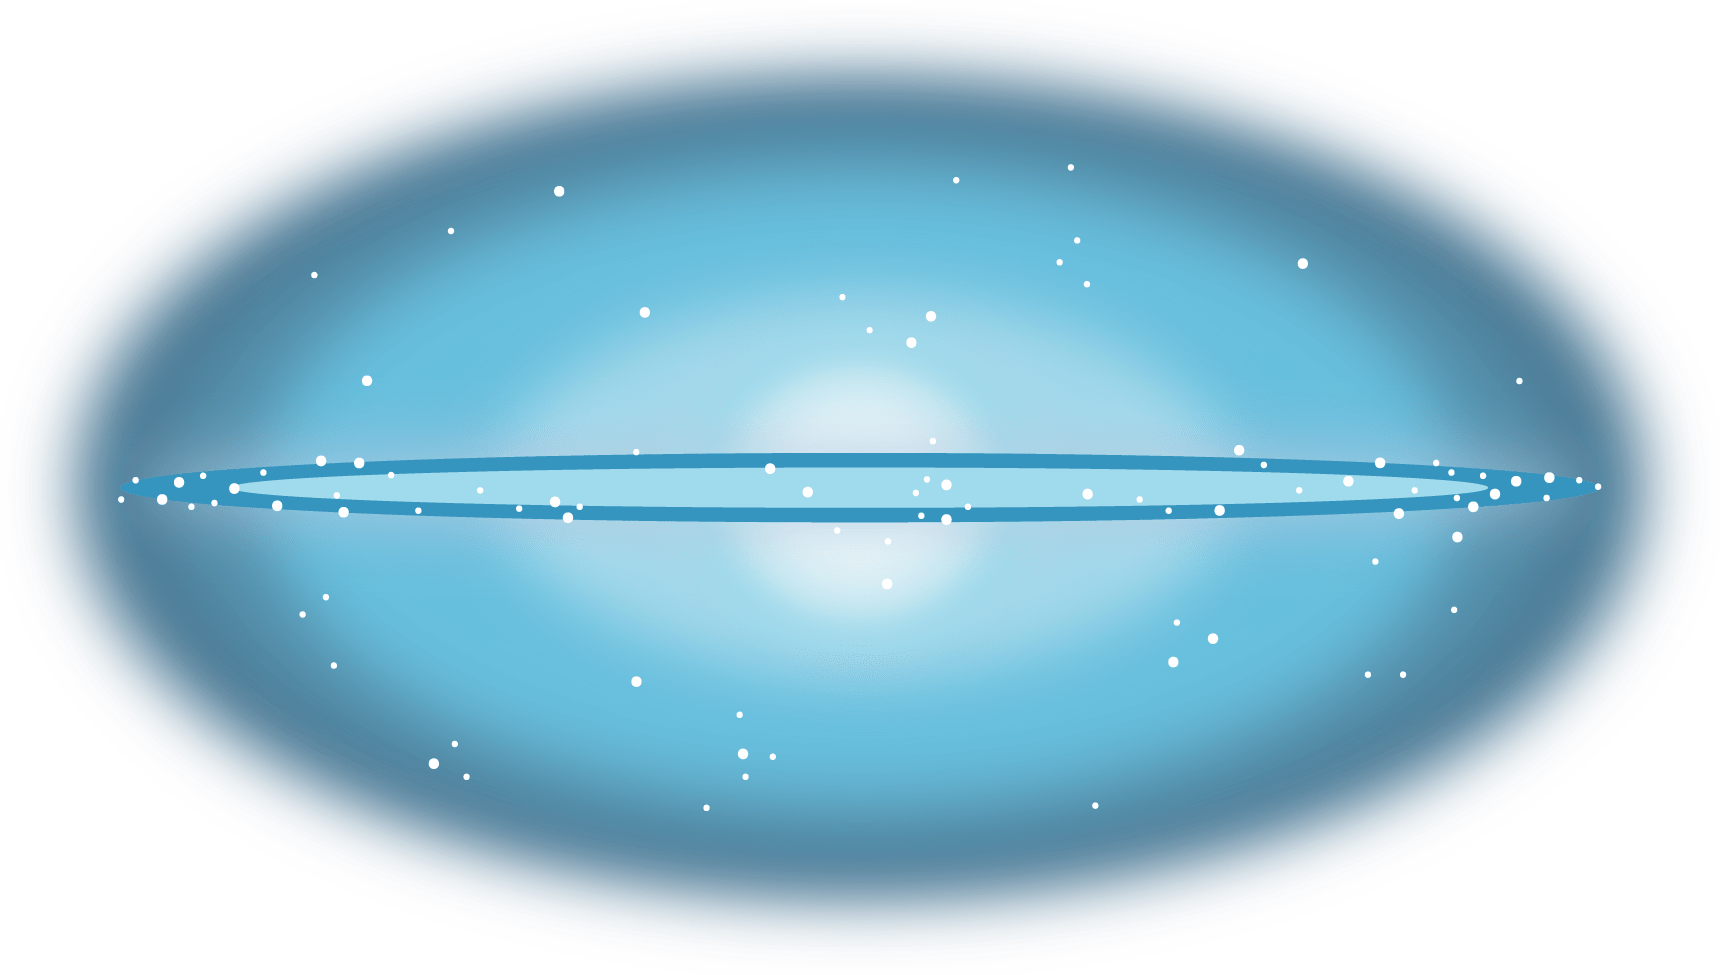 A horizontal oval is outlined by diffused, dark blue surrounding a brighter blue which fades to be lighter and brighter as it moves inward. The center of the shape is a hazy white circle. Cutting across the center of the image is a flattened disc outlined in dark blue with a light blue center. White dots representing stars speckle the image.